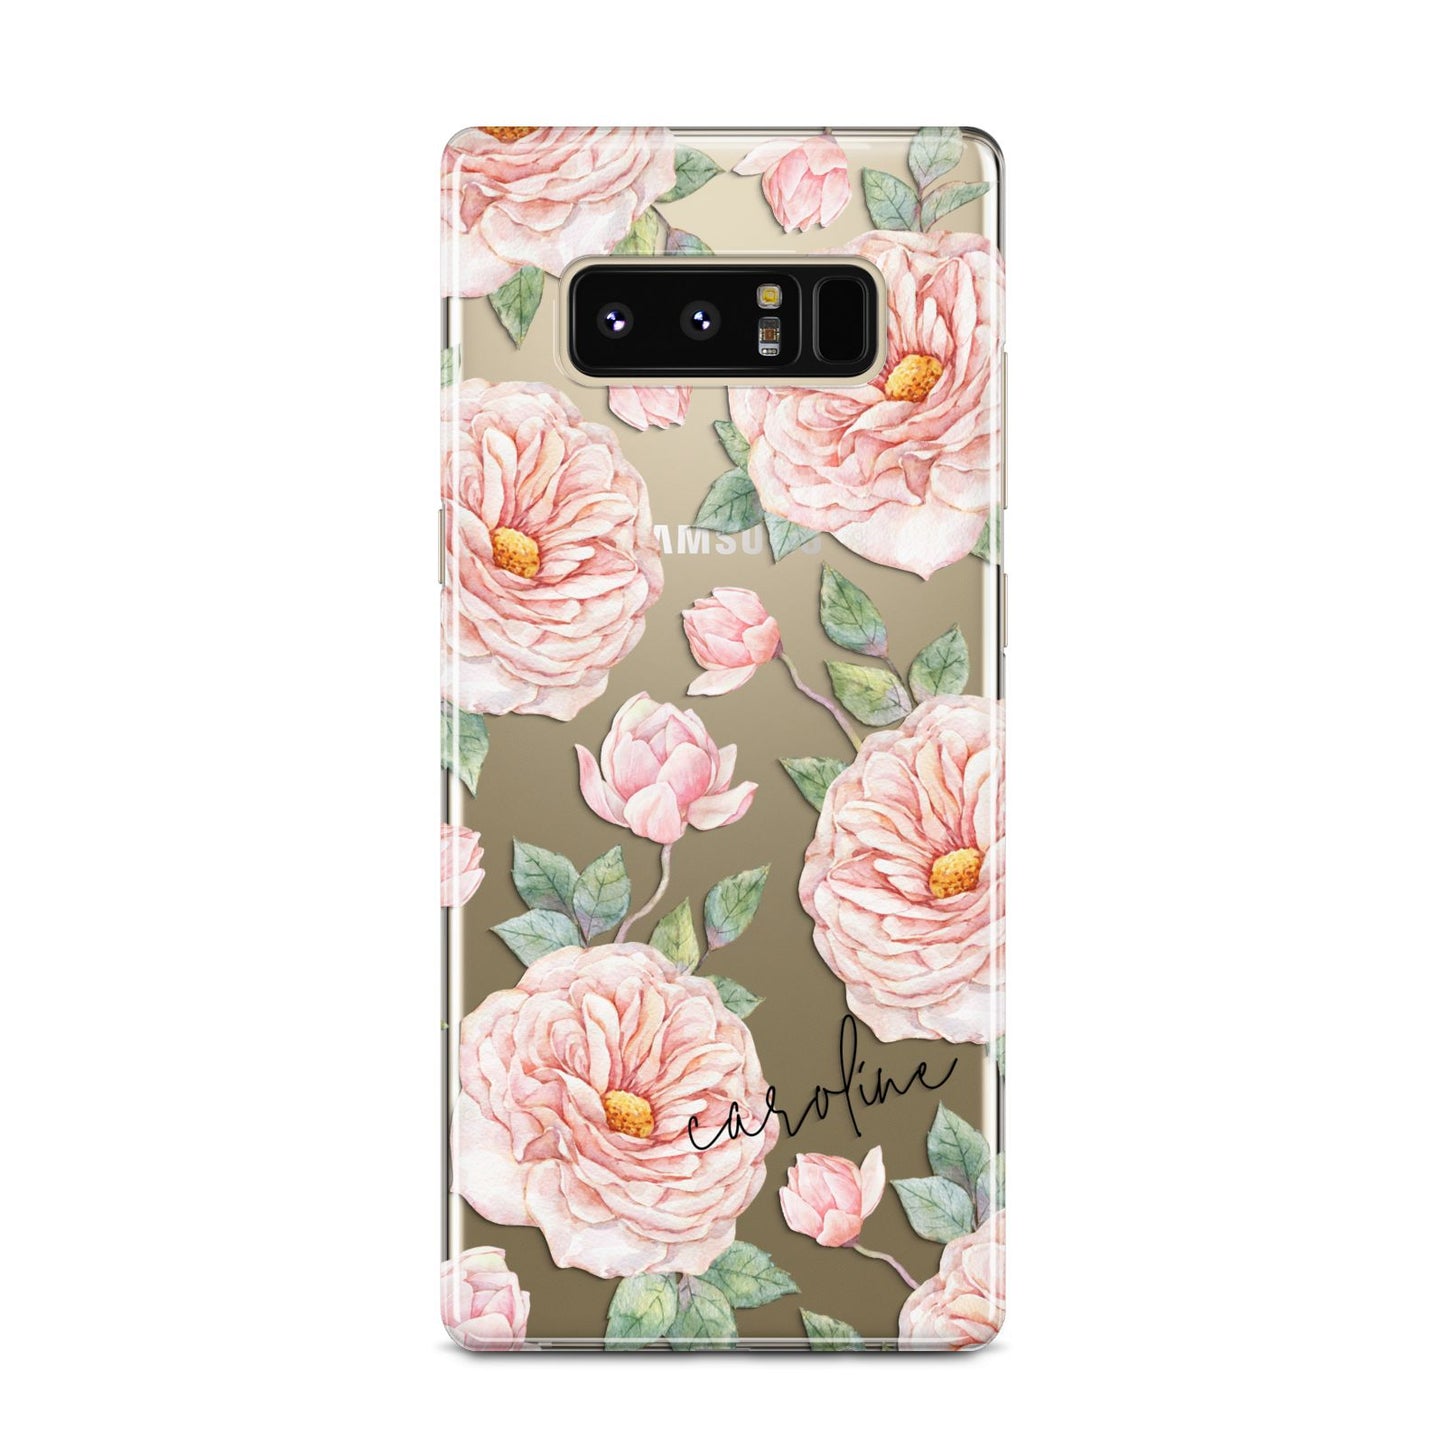 Personalised Peony Samsung Galaxy Note 8 Case